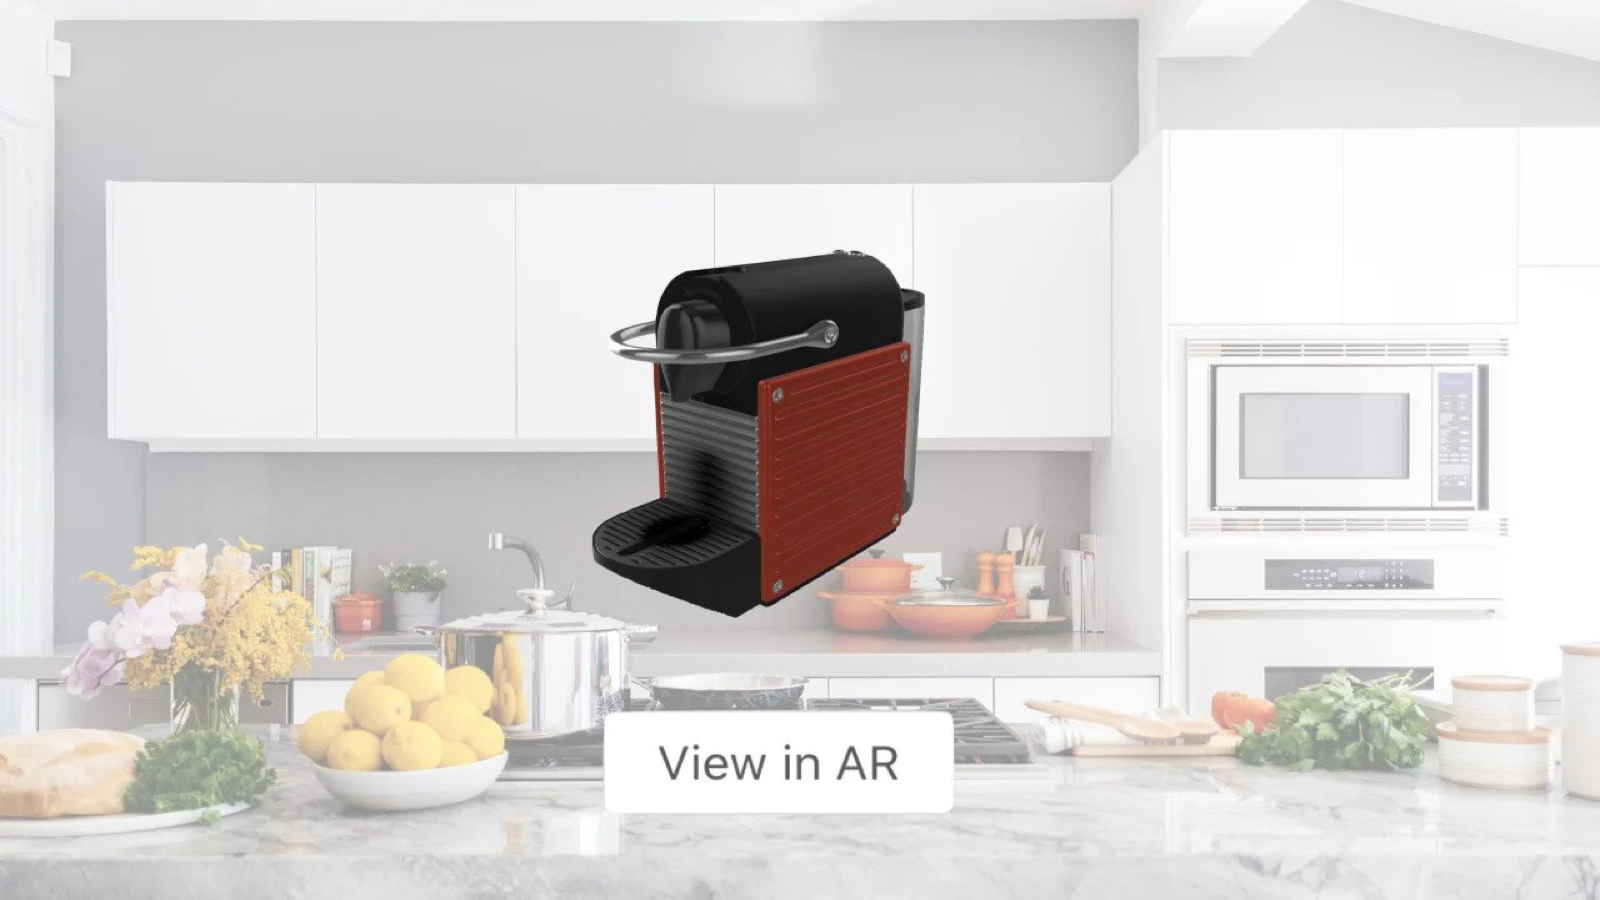 Enable shoppers to place products in their home with AR